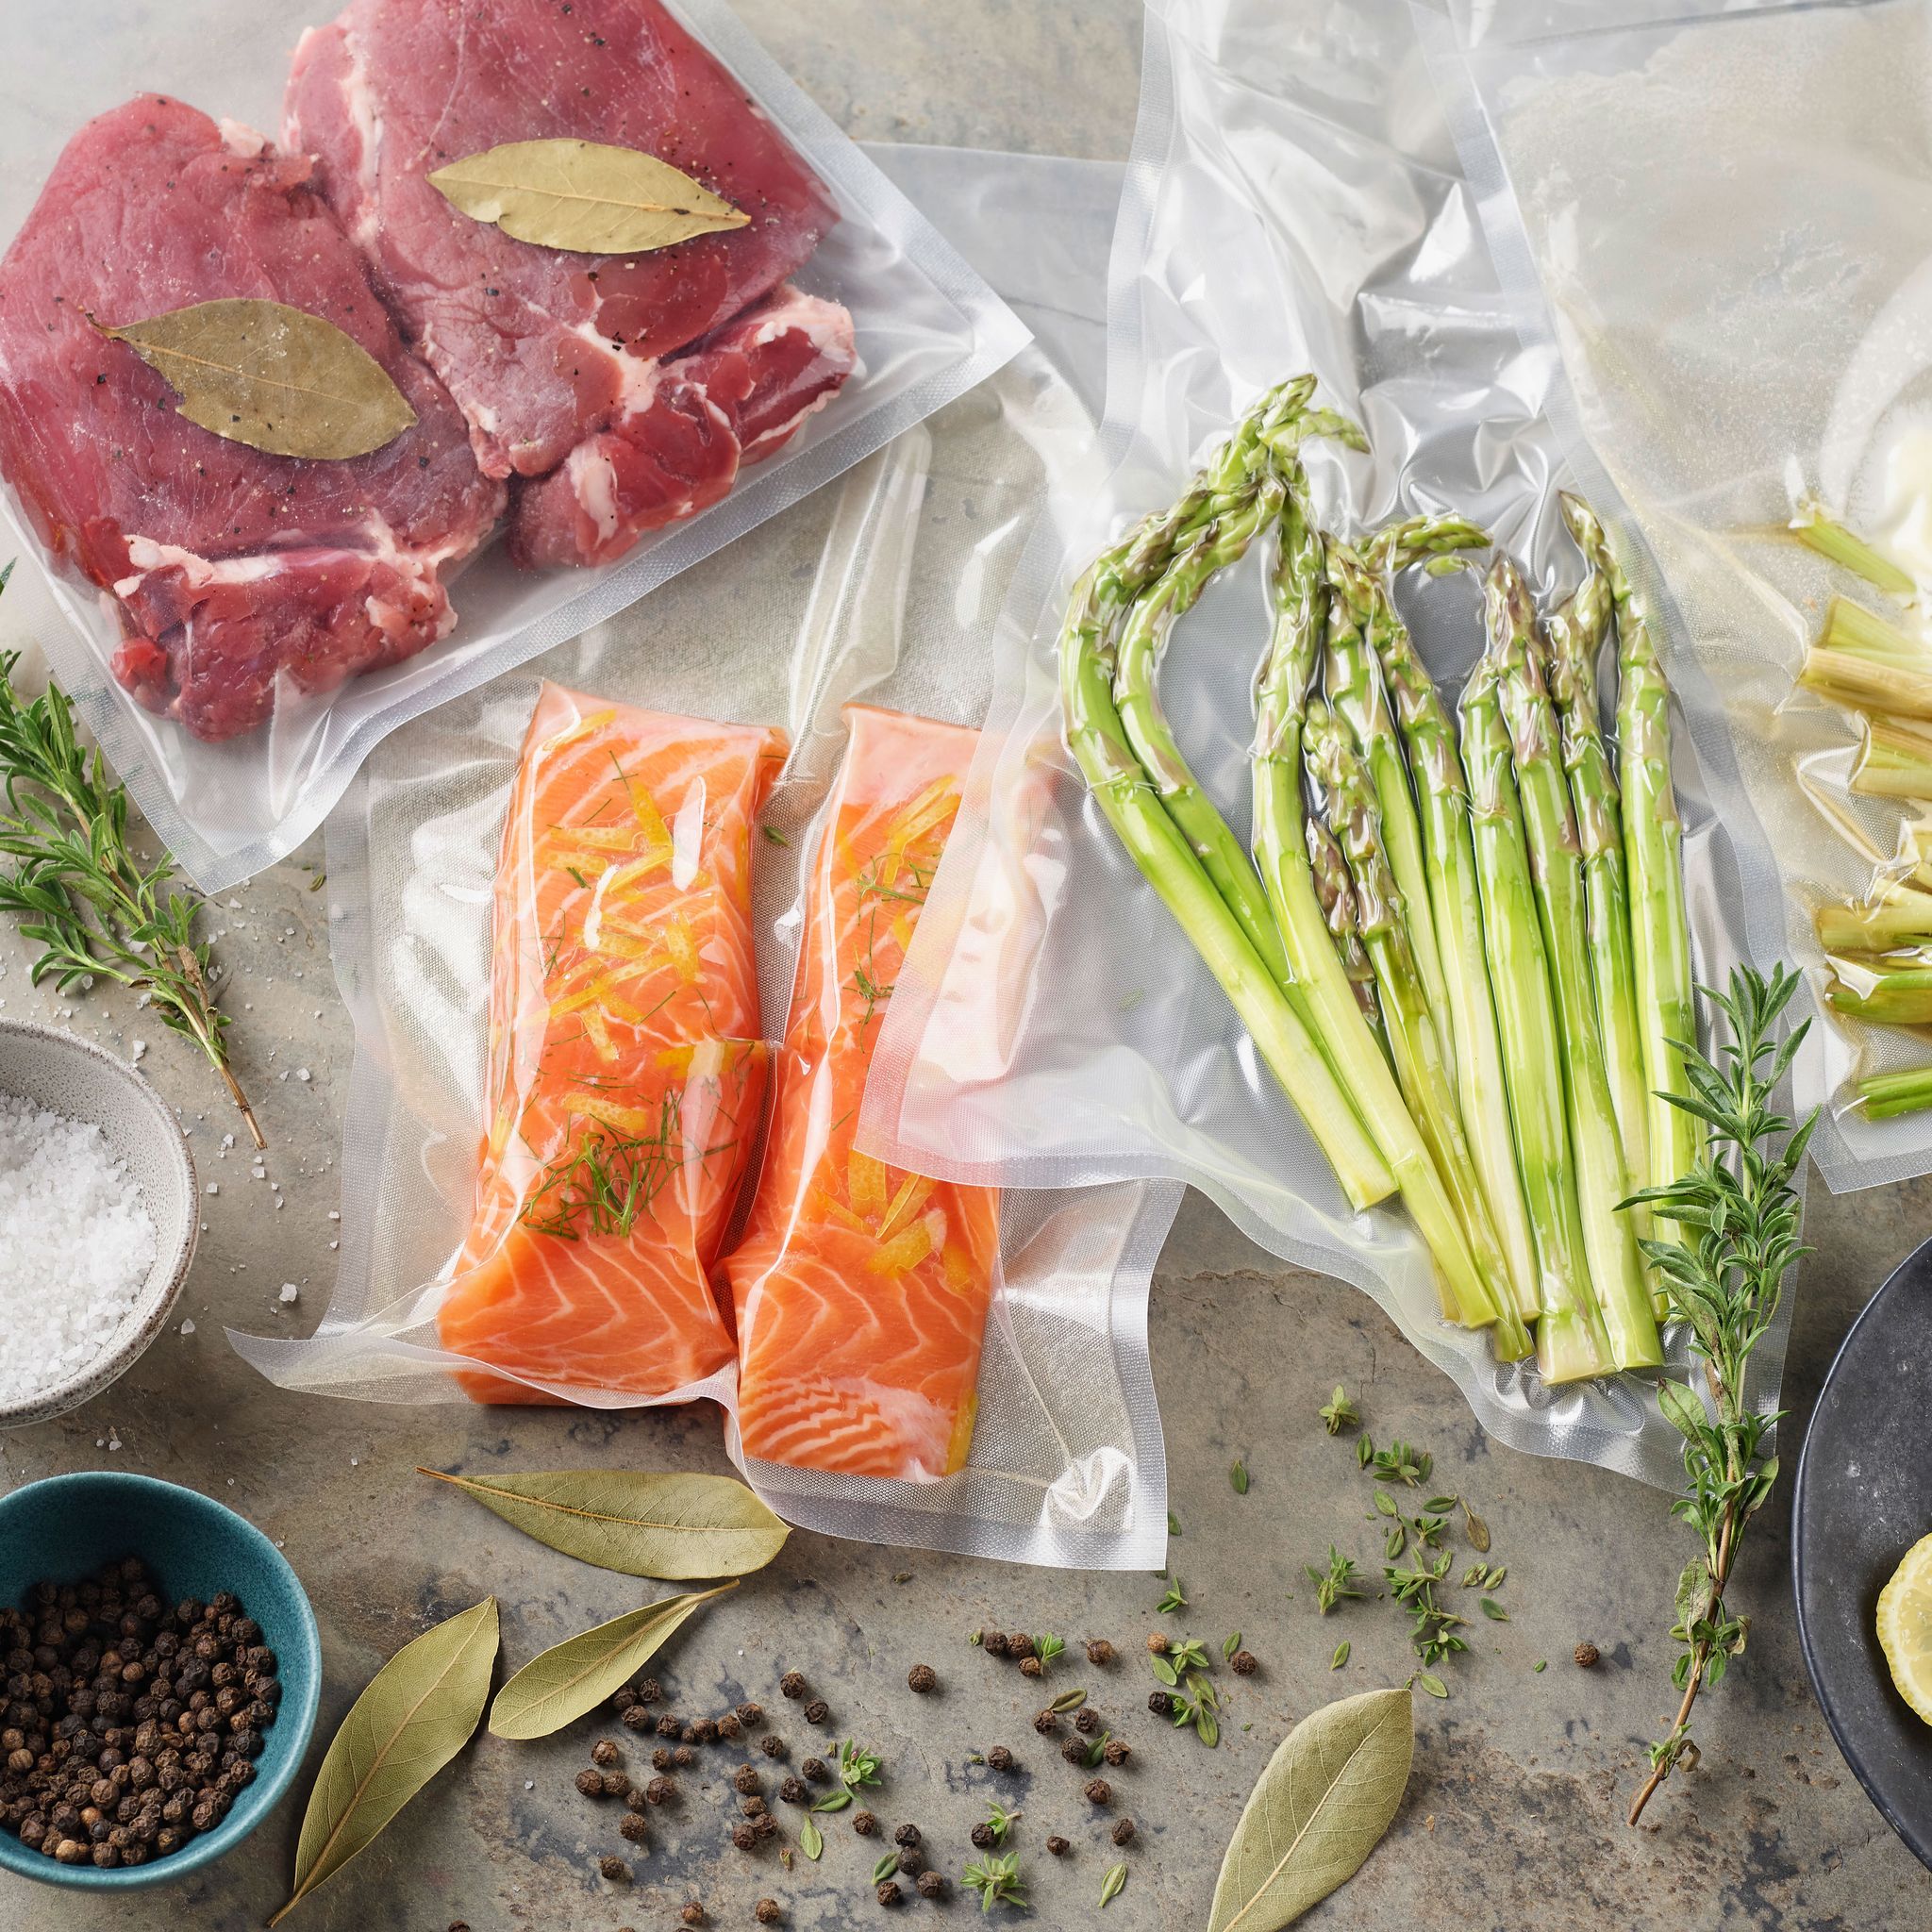 Here's everything you need to cook sous vide at home - Reviewed